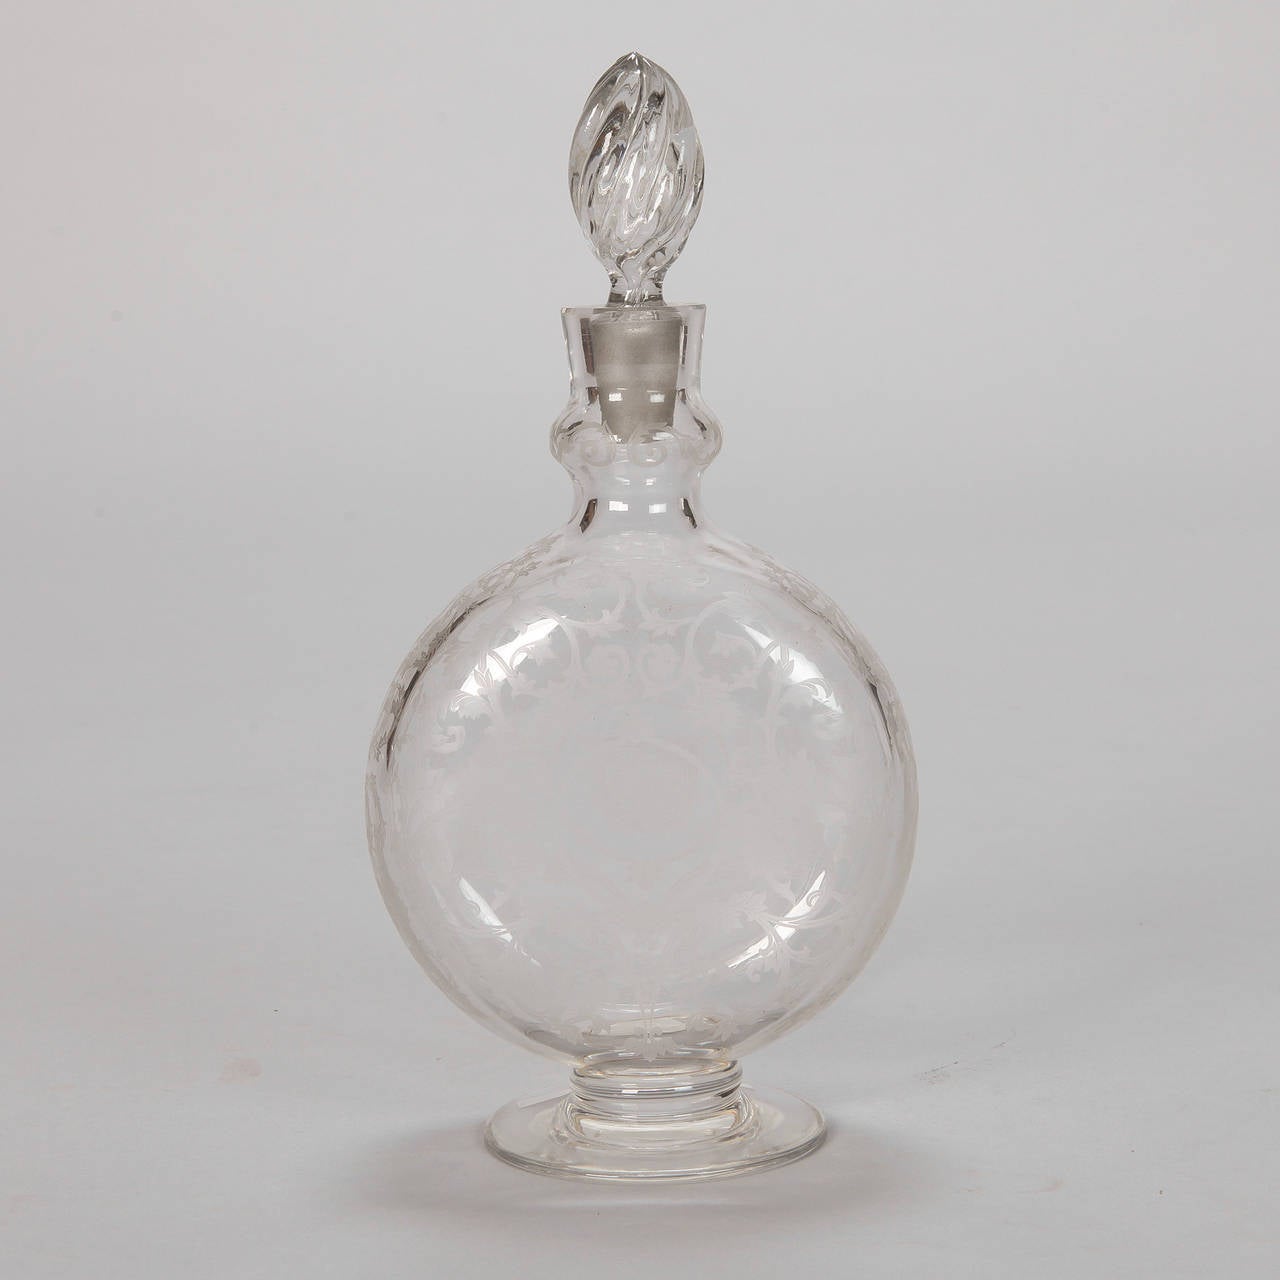 Circa 1930s signed Baccarat decanter of clear, etched glass with pedestal base, round, disk-shape body decorated with etched vines and flowers and a tall, twisted flame-shape stopper. Etched signature on the bottom.